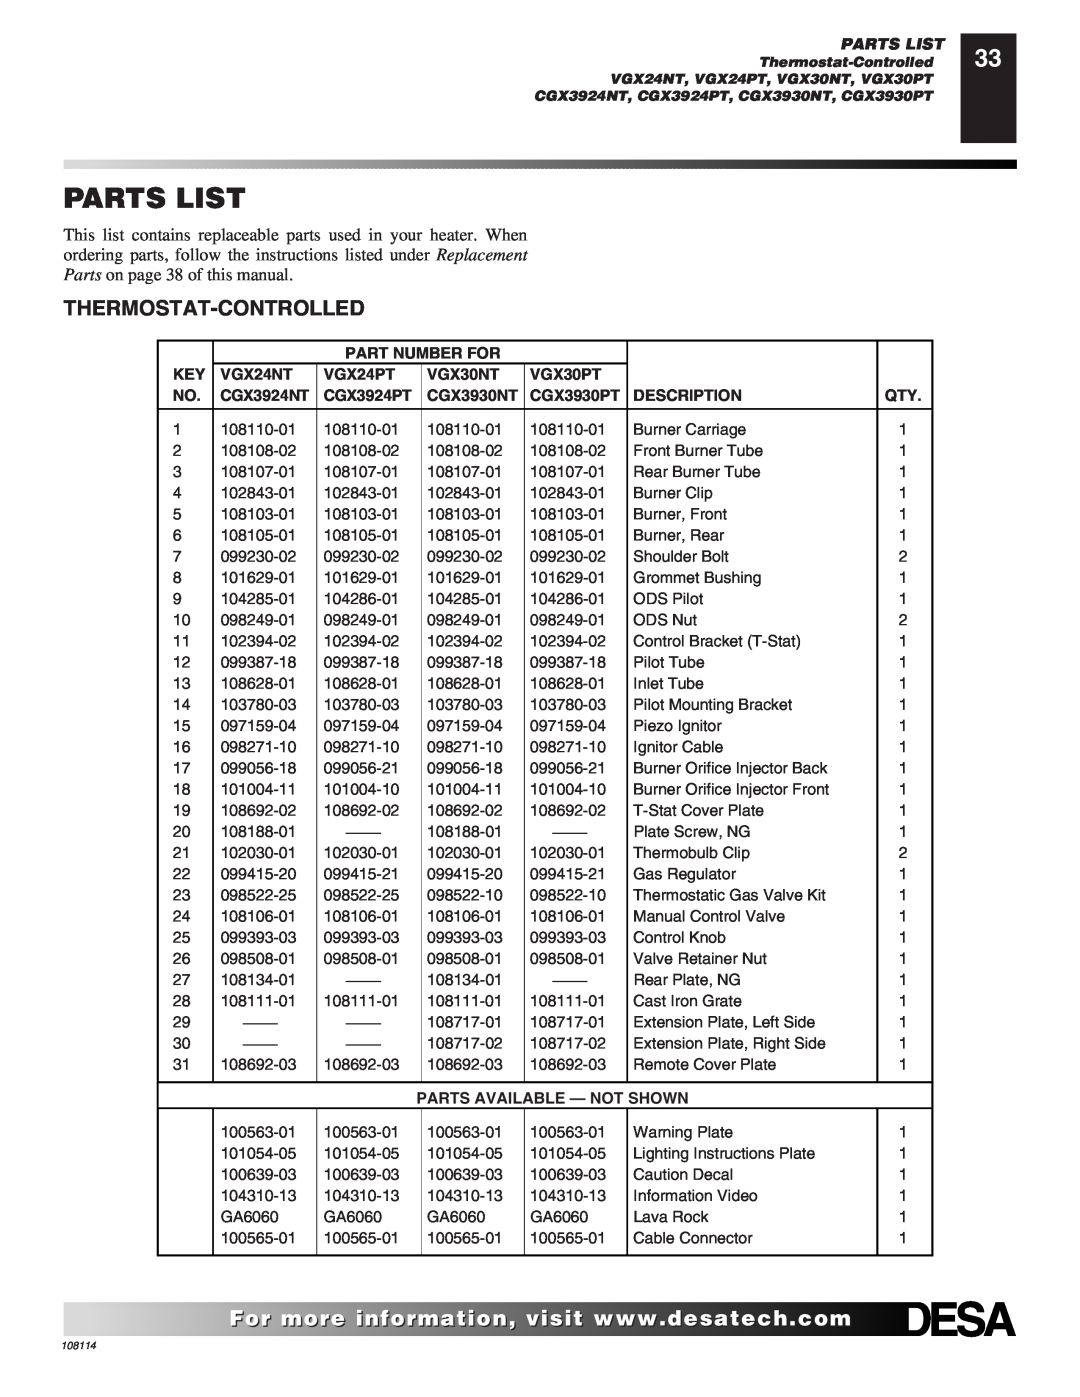 Desa INTERNATIONAL UNVENTED (VENT-FREE) GAS LOG HEATER installation manual Parts List, Thermostat-Controlled 